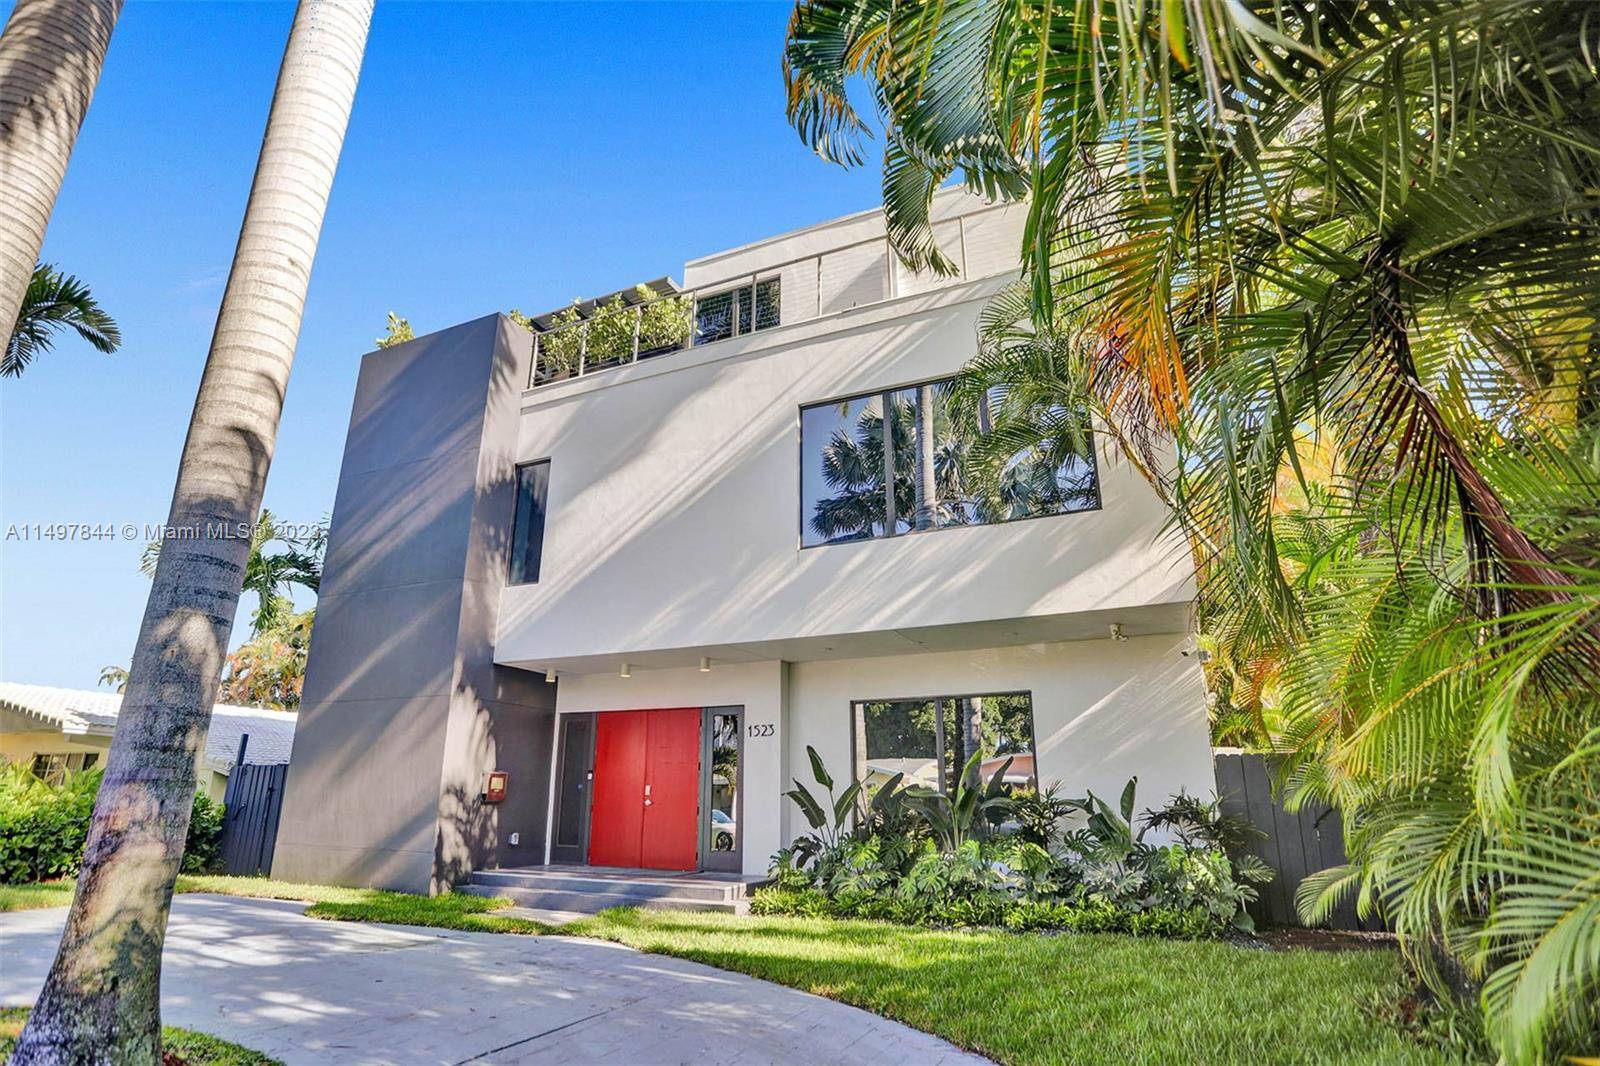 Experience the epitome of luxury living in this tropical contemporary home, nestled on lush Hollywood beach area.